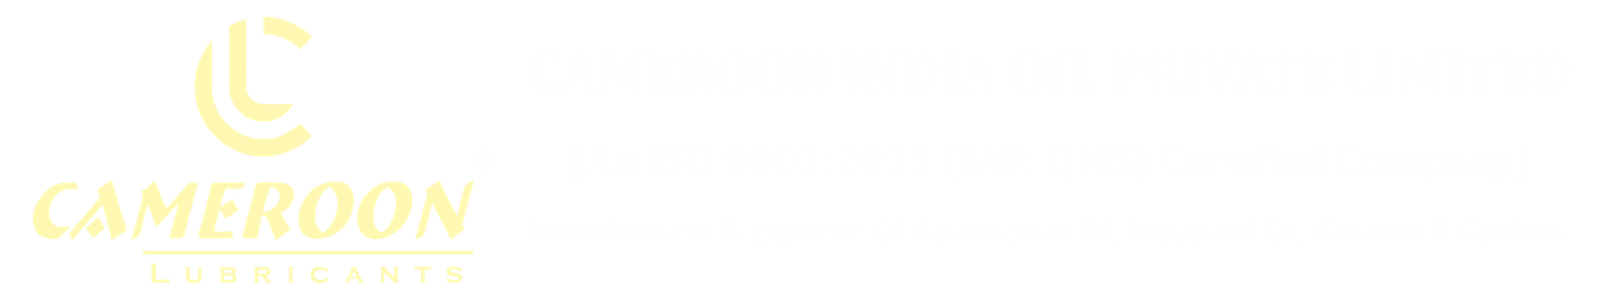 Cameroon India Oil